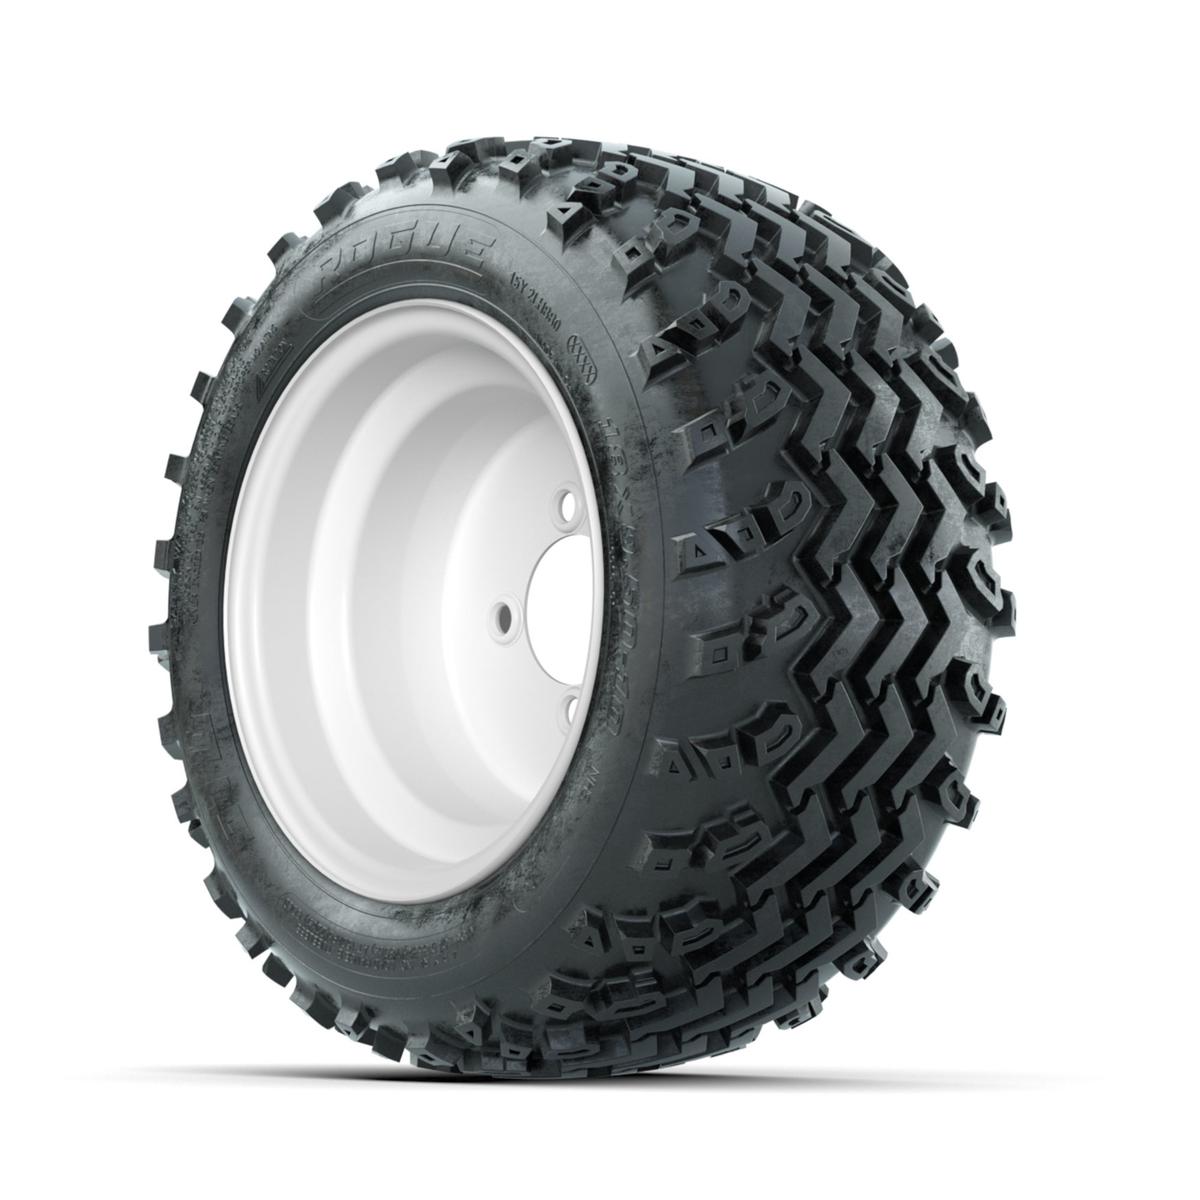 GTW Steel White 10 in Wheels with 18x9.50-10 Rogue All Terrain Tires – Full Set